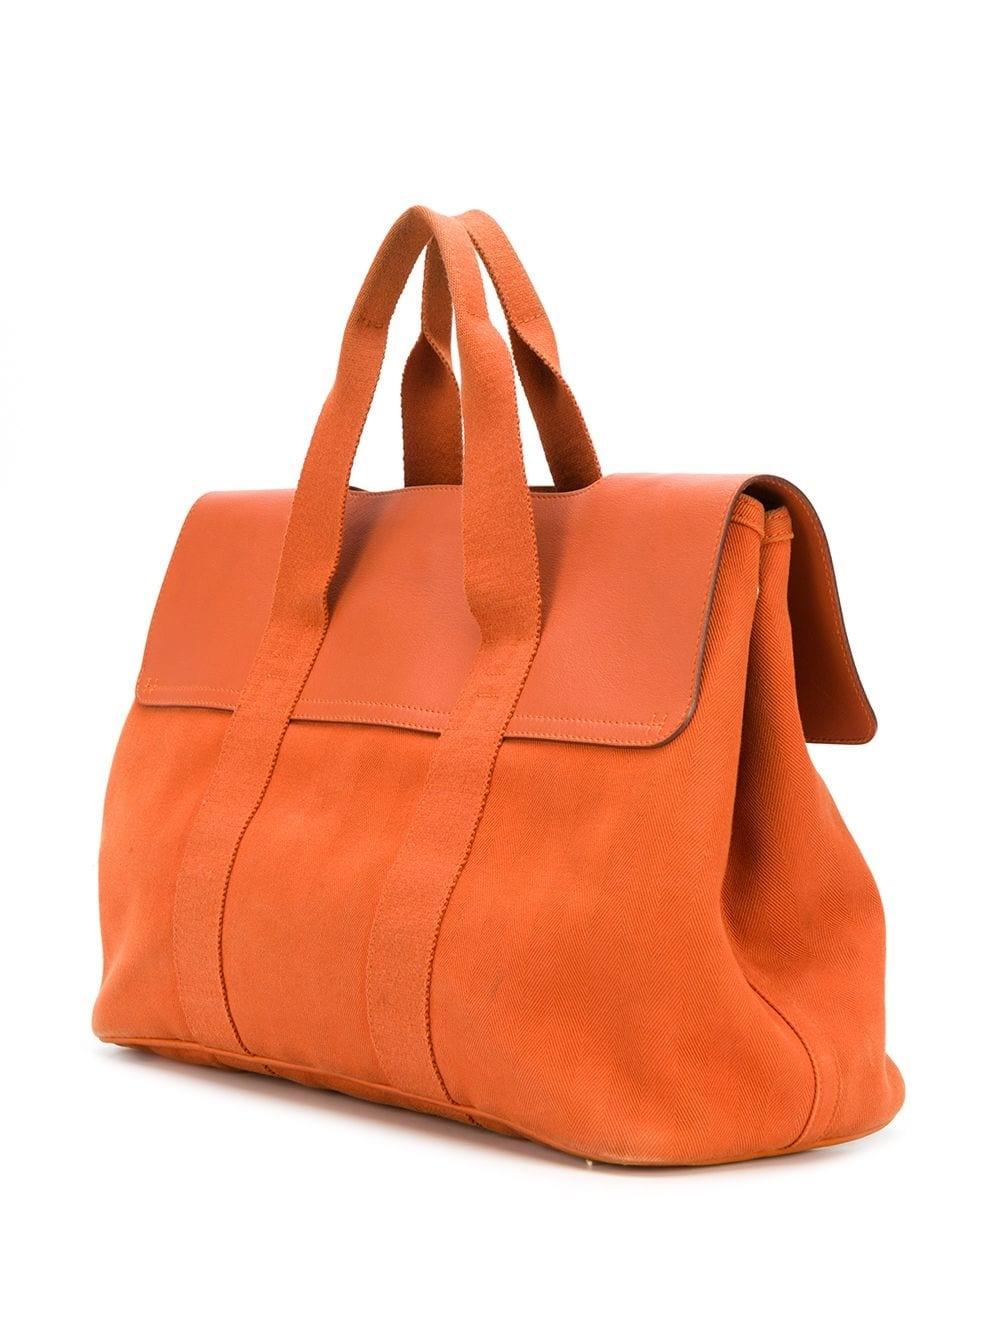 Adding a twist to the traditional Hermès Valparaiso tote bag, this highly collectable rarity combines contrasting panels of durable brick-orange leather with lightweight toile, silver-toned metal accents and tonal stitching. Synonymous with the